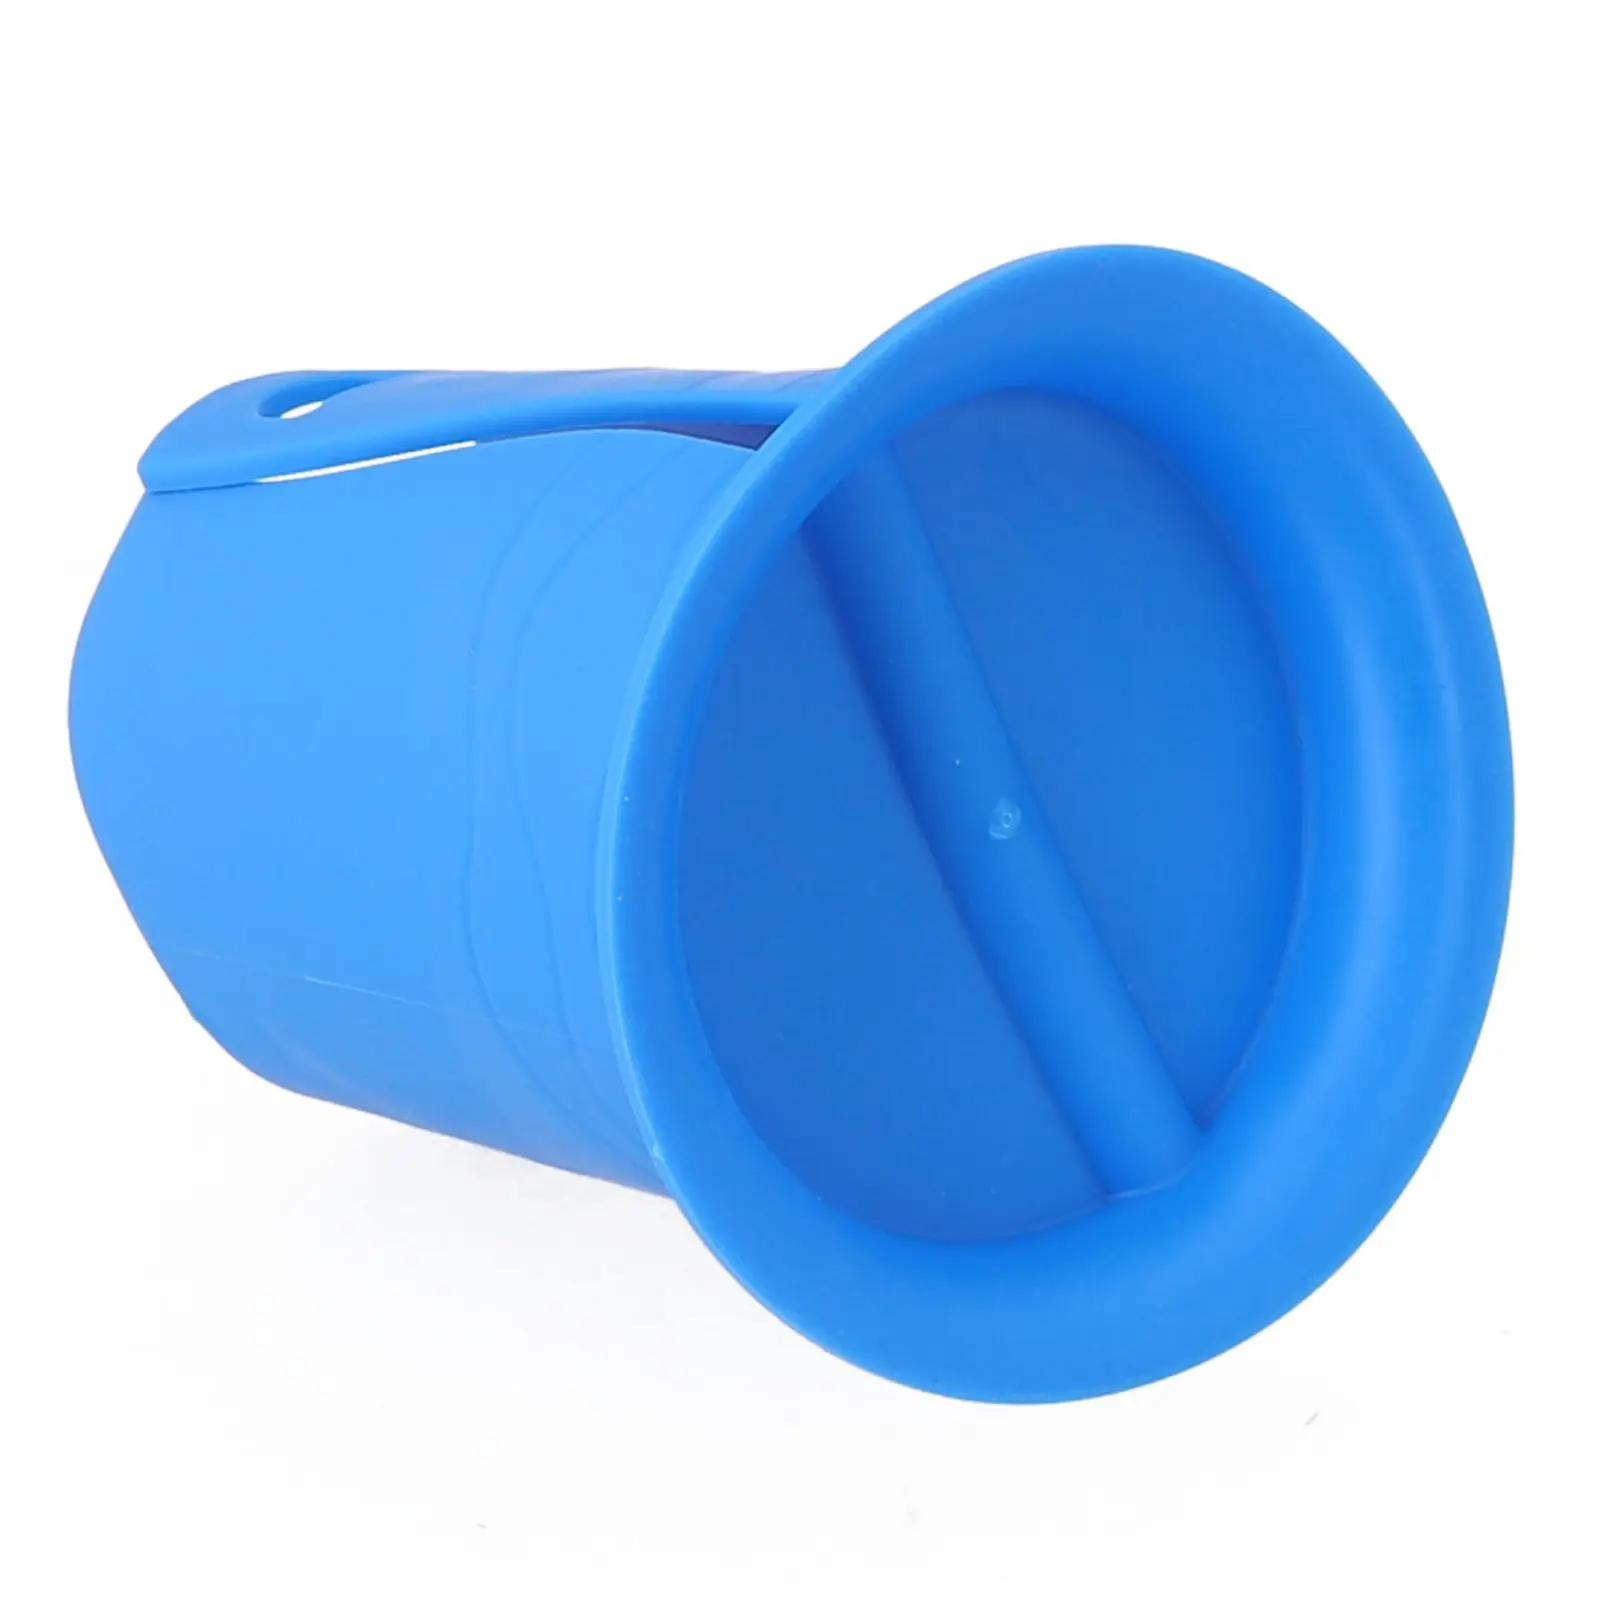 

Kayak Cup Drink Holder Water Bottle Holder Sturdy Design, Easy to Install, Ideal for Kayaking and Paddle Boarding